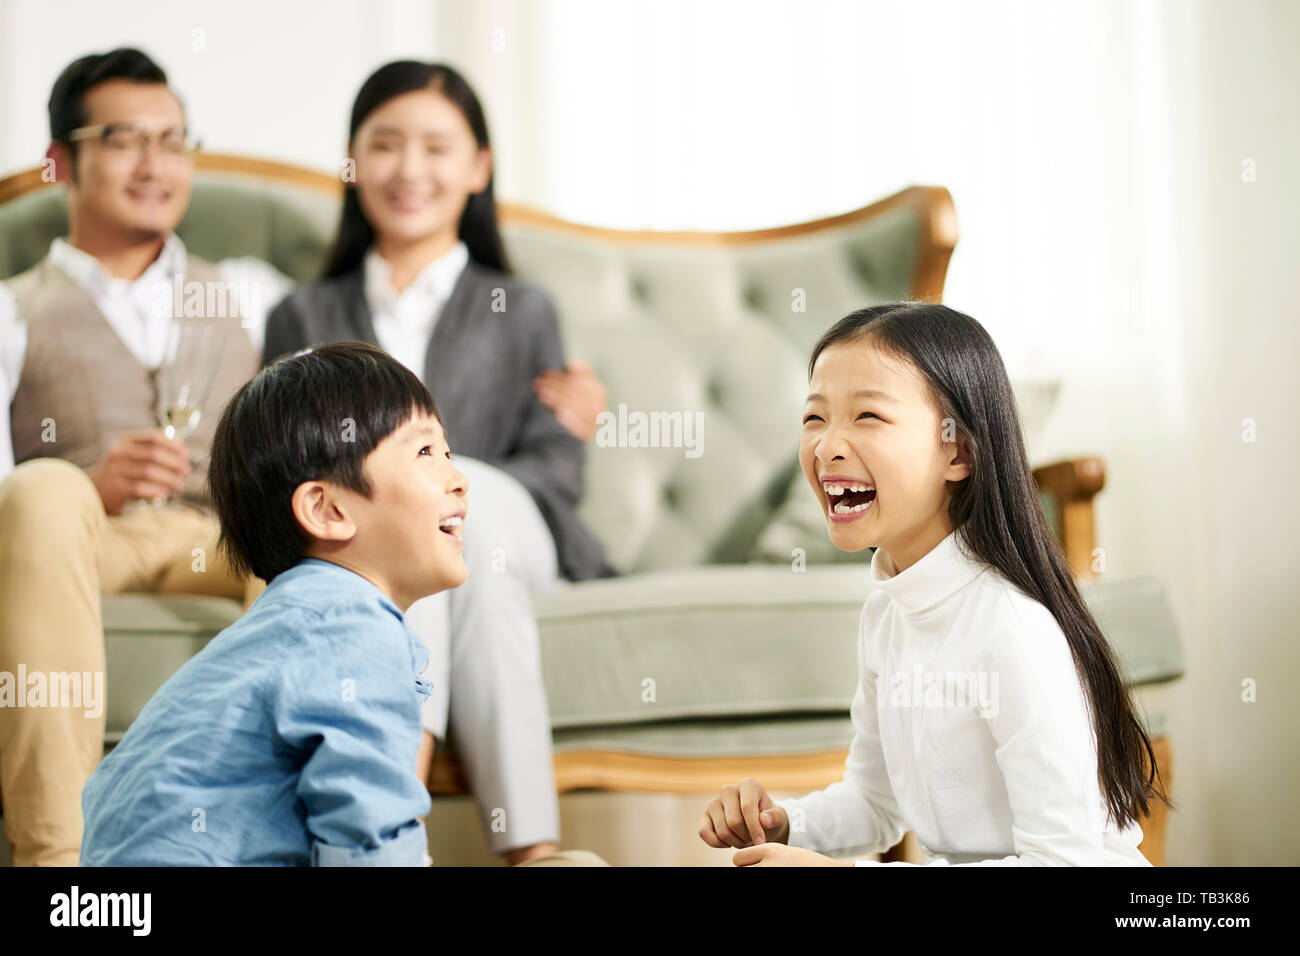 asian family with two children having a good time at home Stock Photo